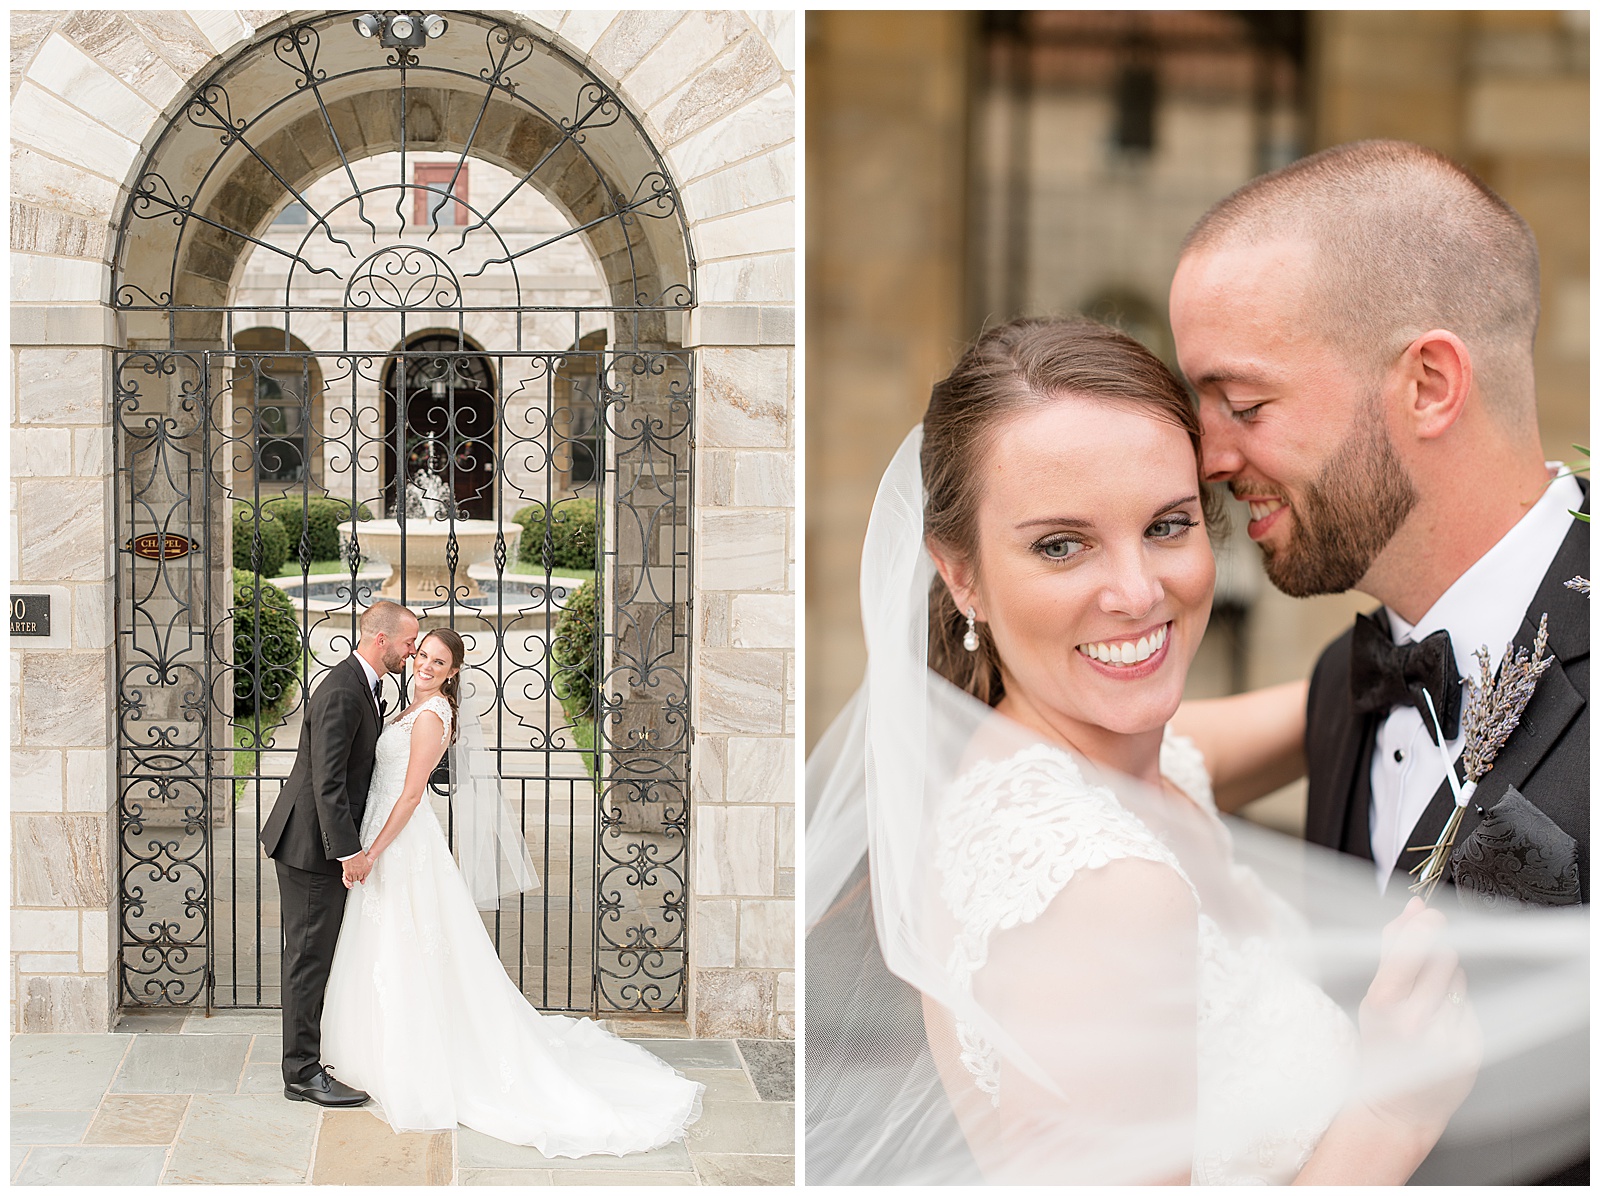 Bride and Groom Portraits at the Shrine of Saint ANthony